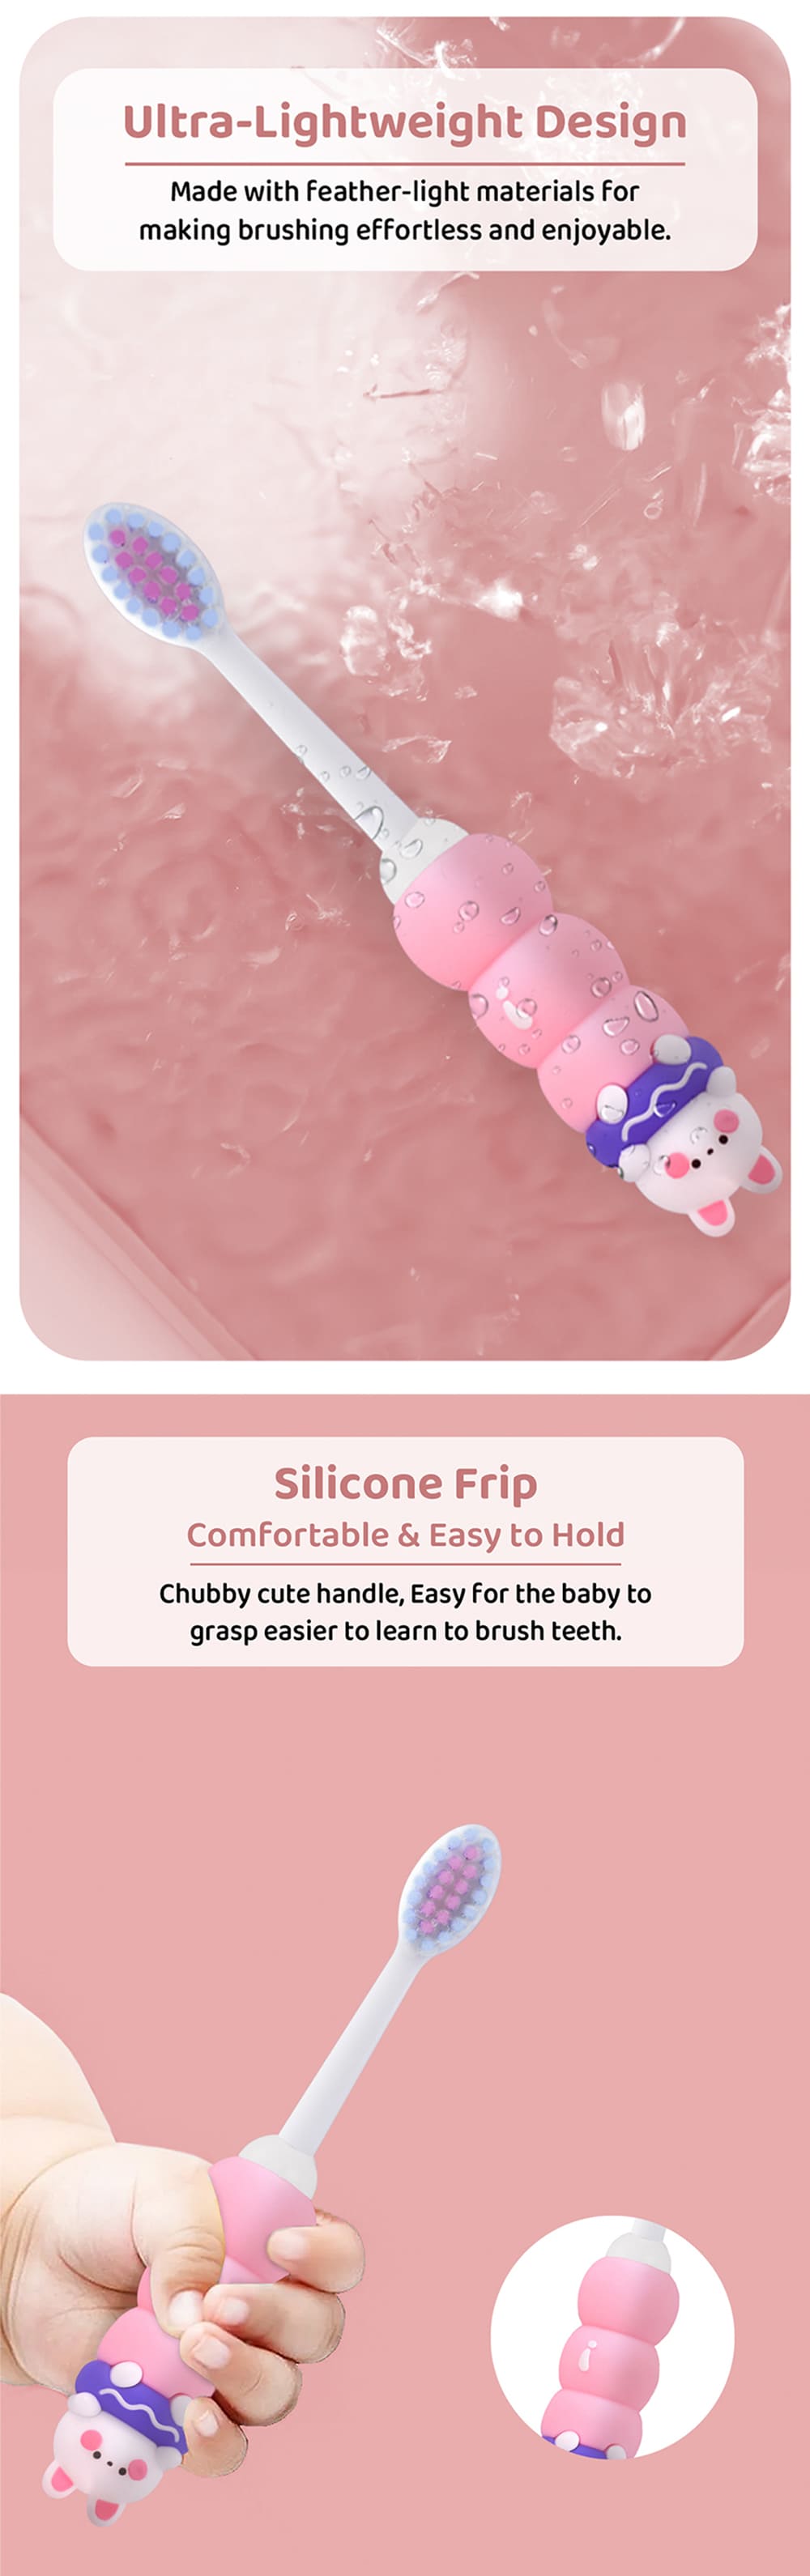 Extra Soft Bristle Tooth Brush with Silicone Grip